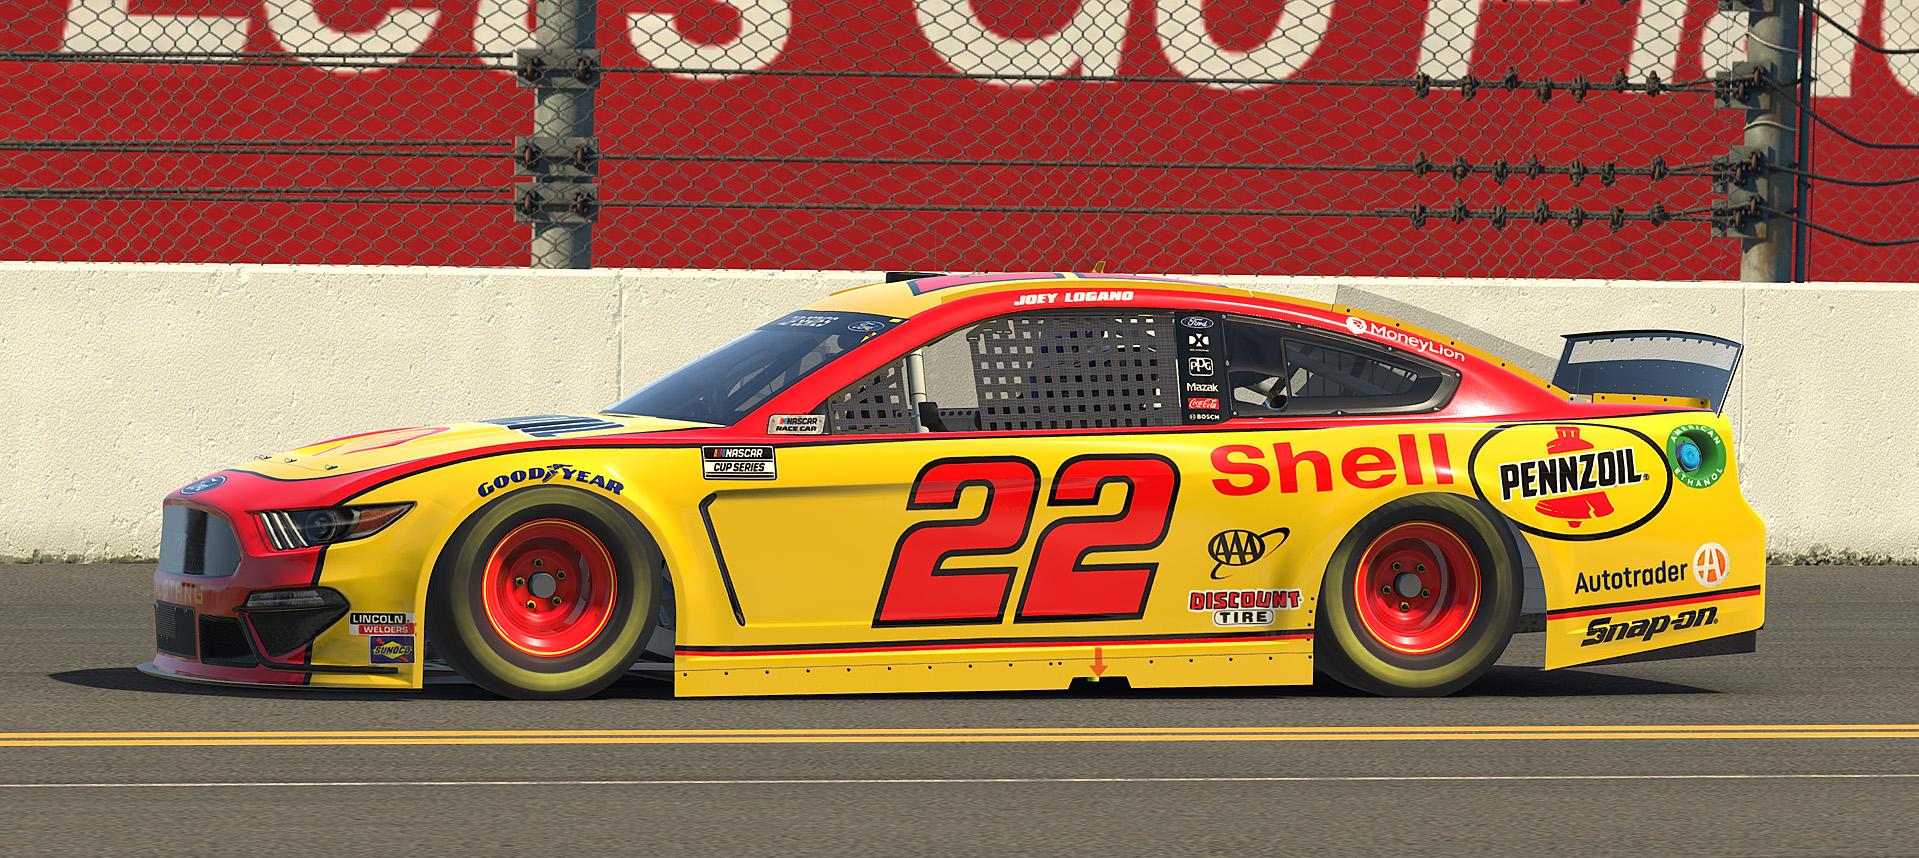 fictional-22-joey-logano-shell-pennzoil-ford-mustang-2020